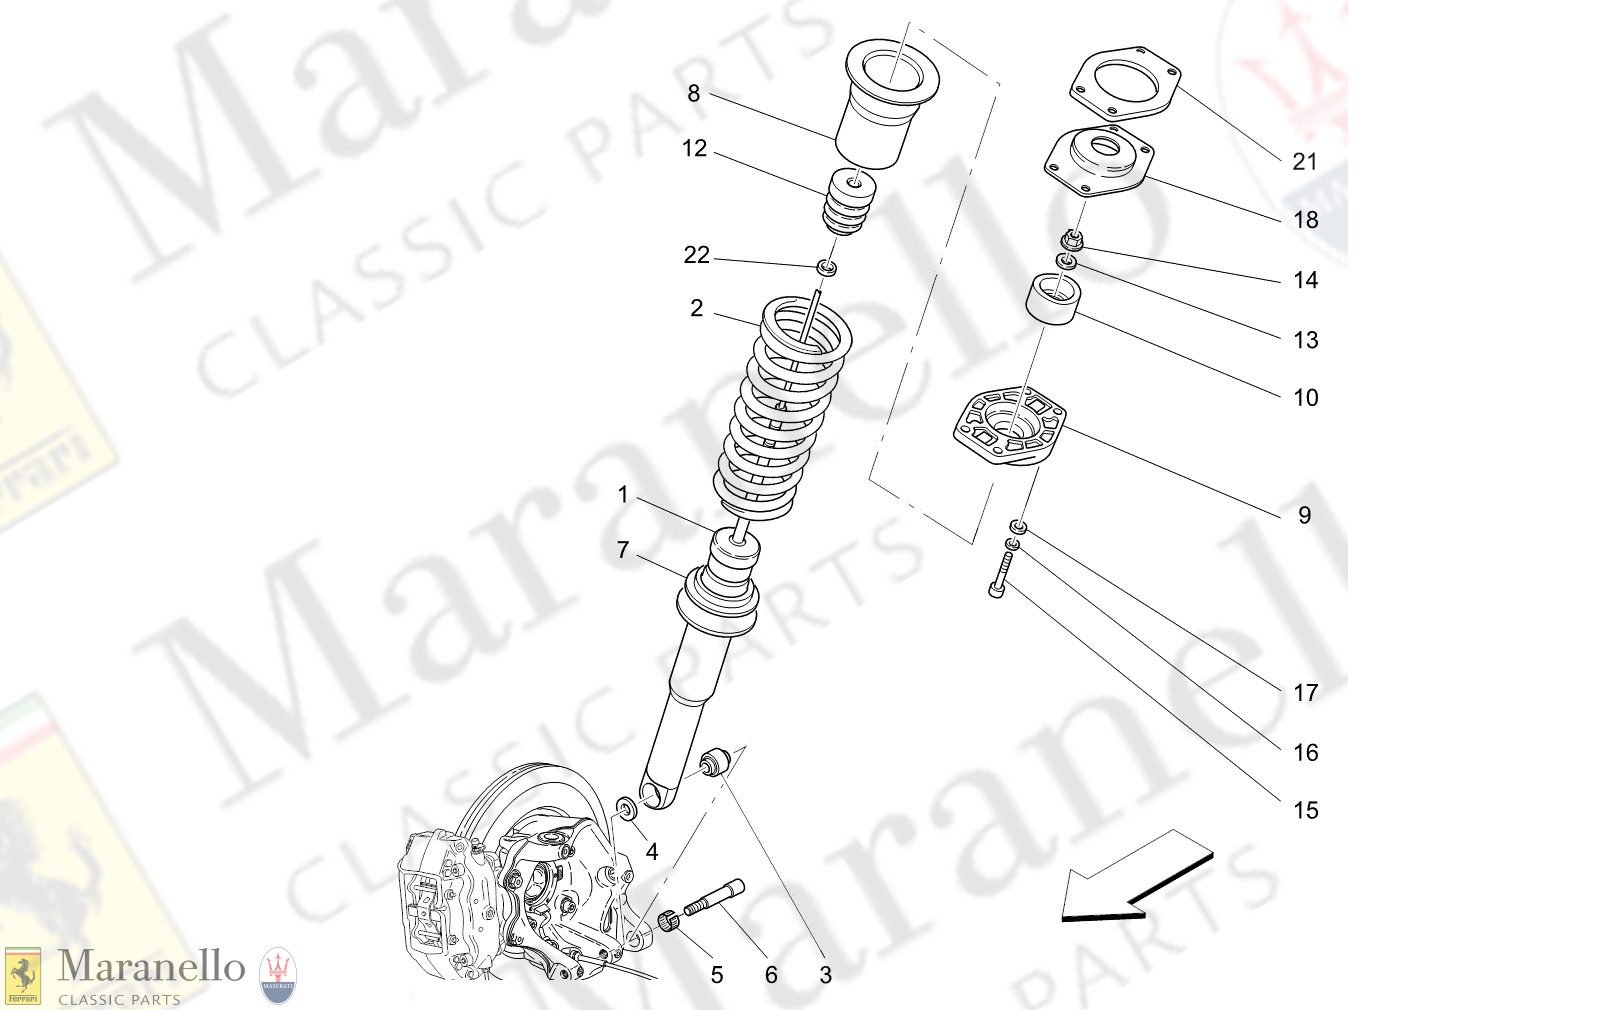 06.21 - 16 - 0621 - 16 Rear Shock Absorber Devices